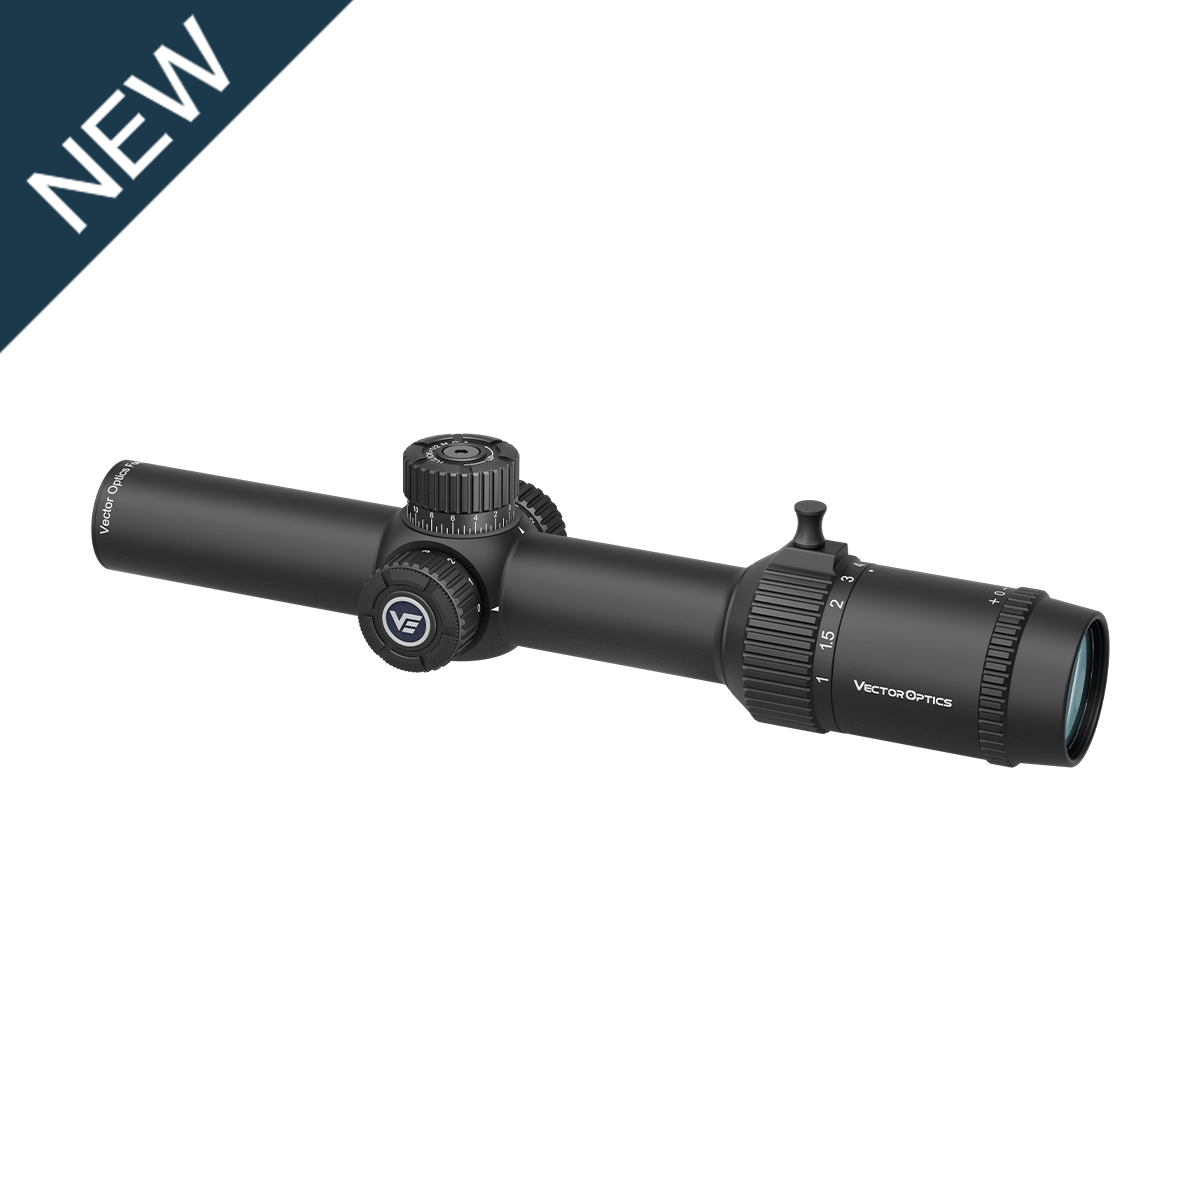 PRODUCT-Rifle Scope & Red Dot Sight Manufacturer- Vector Optics